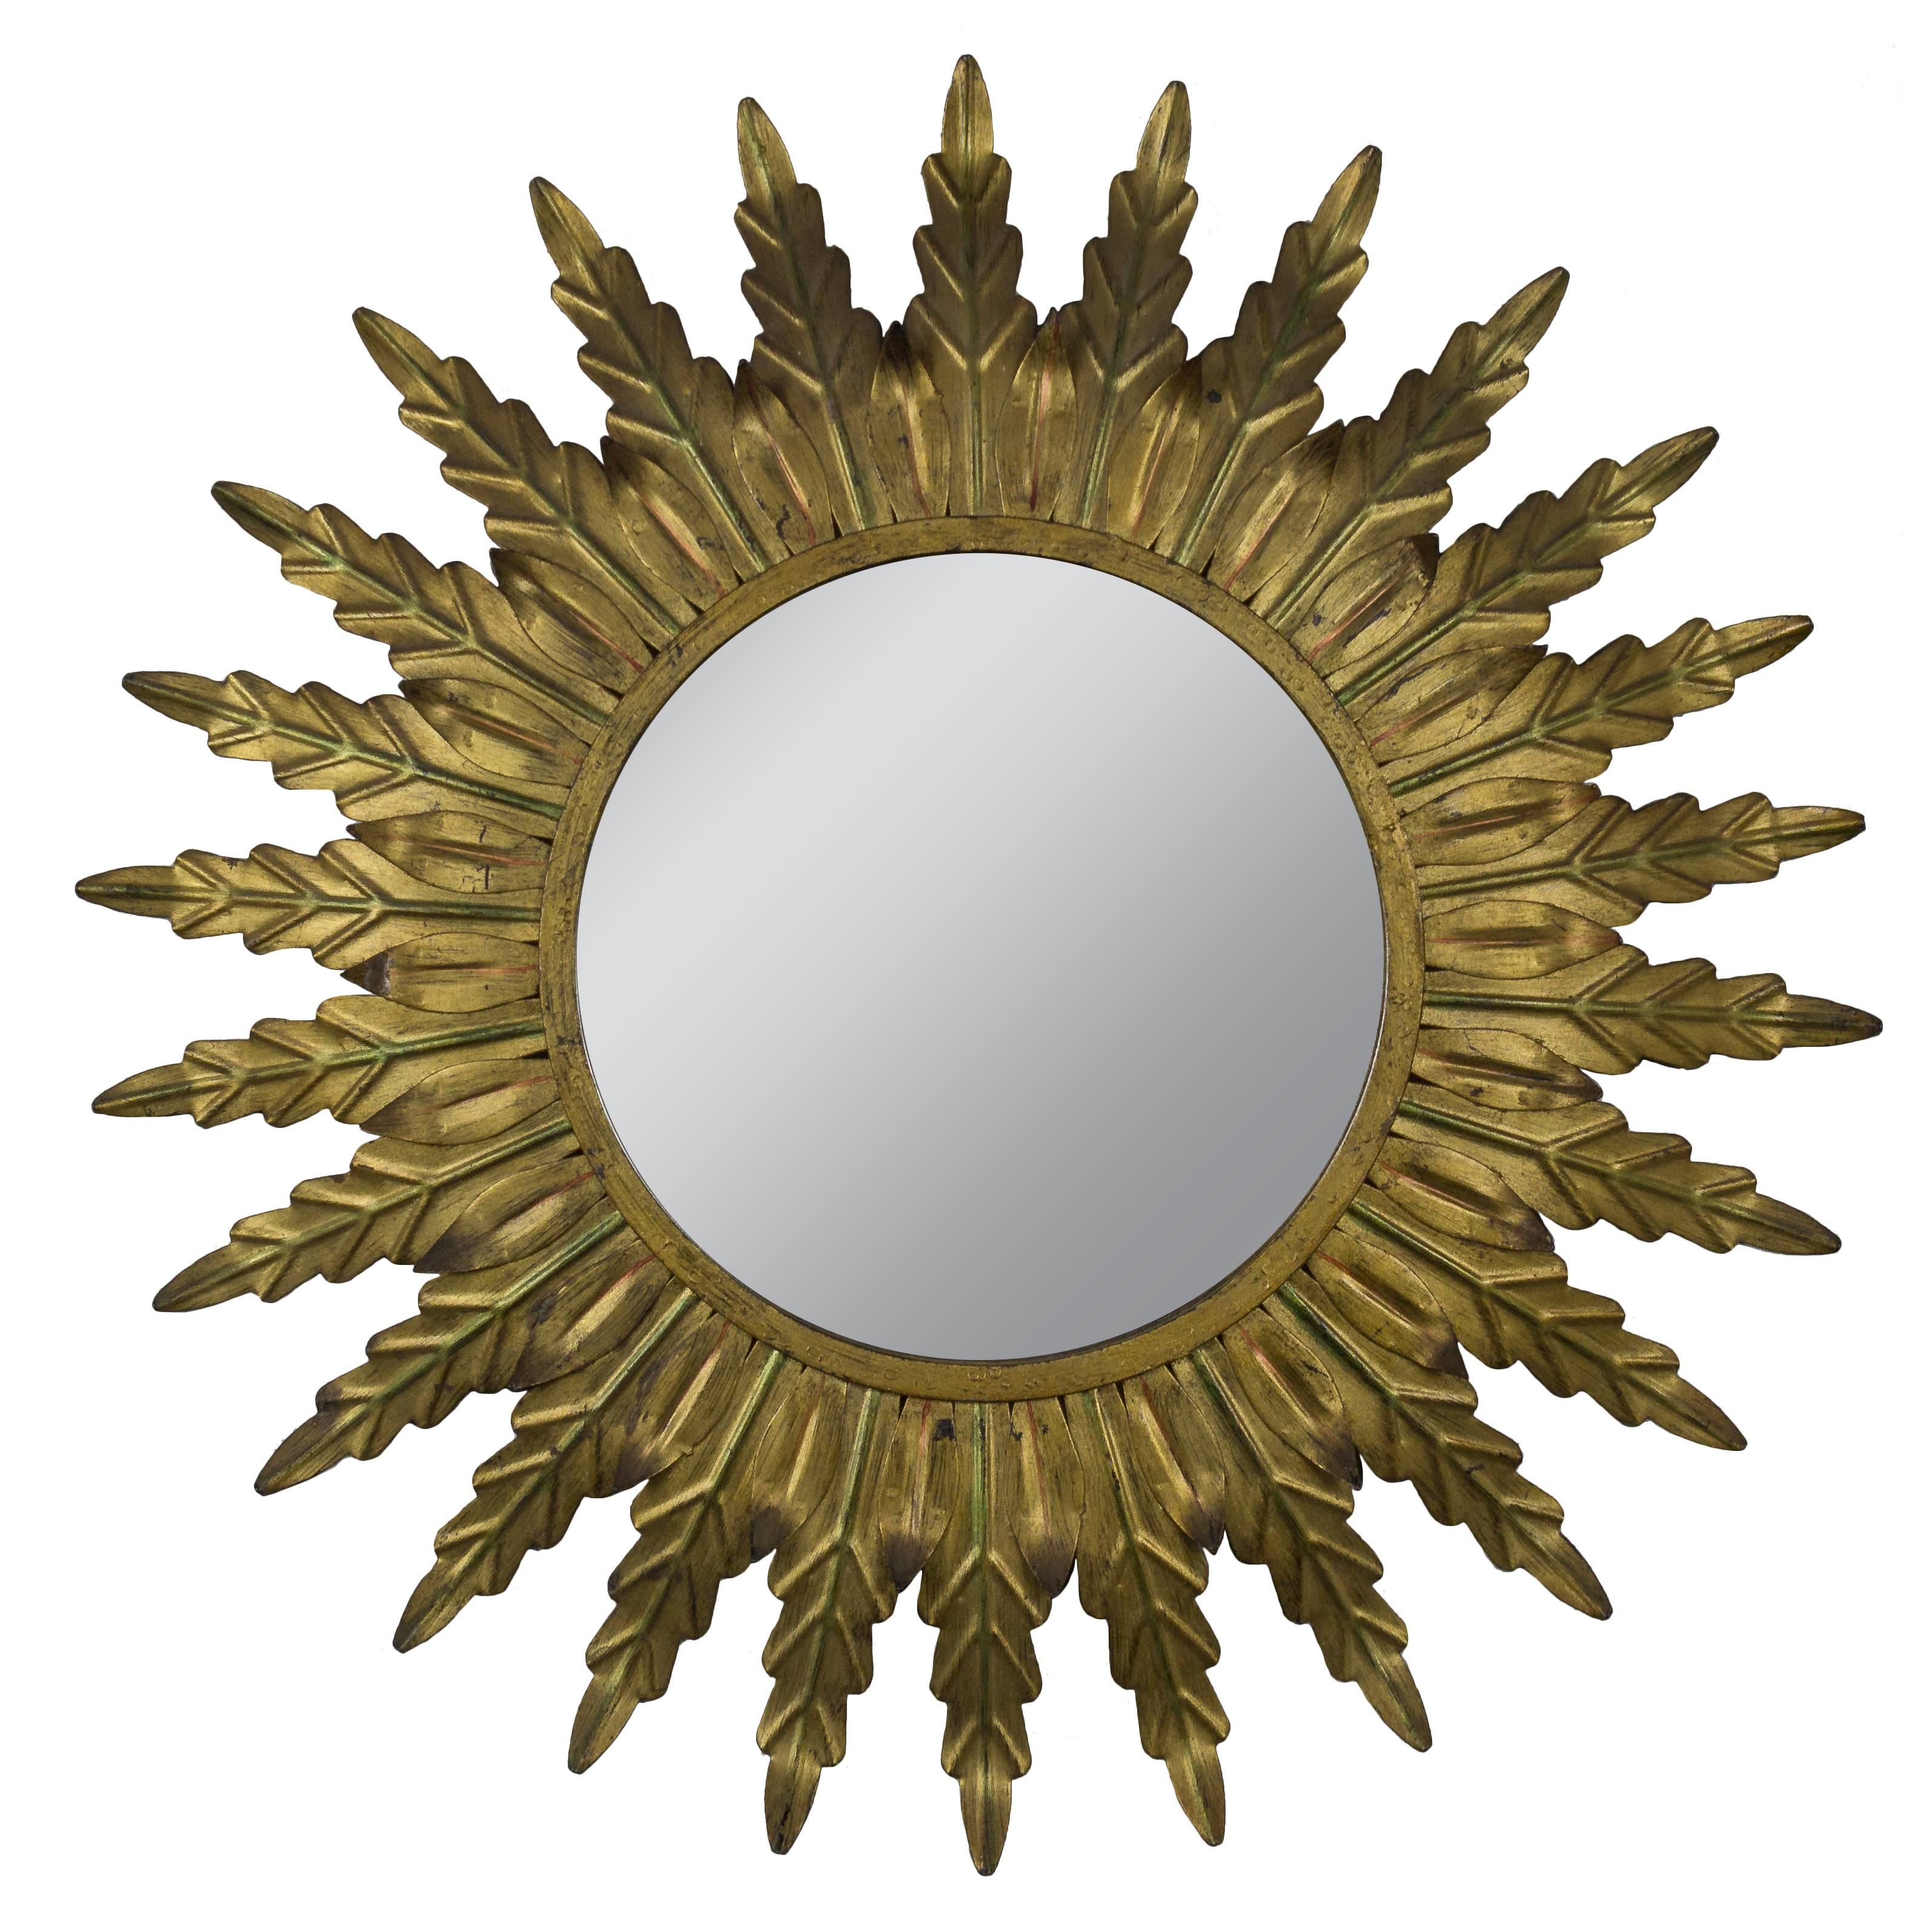 Gilt Metal Sunburst Mirror with Radiating Leaves and Traces of Green Hues